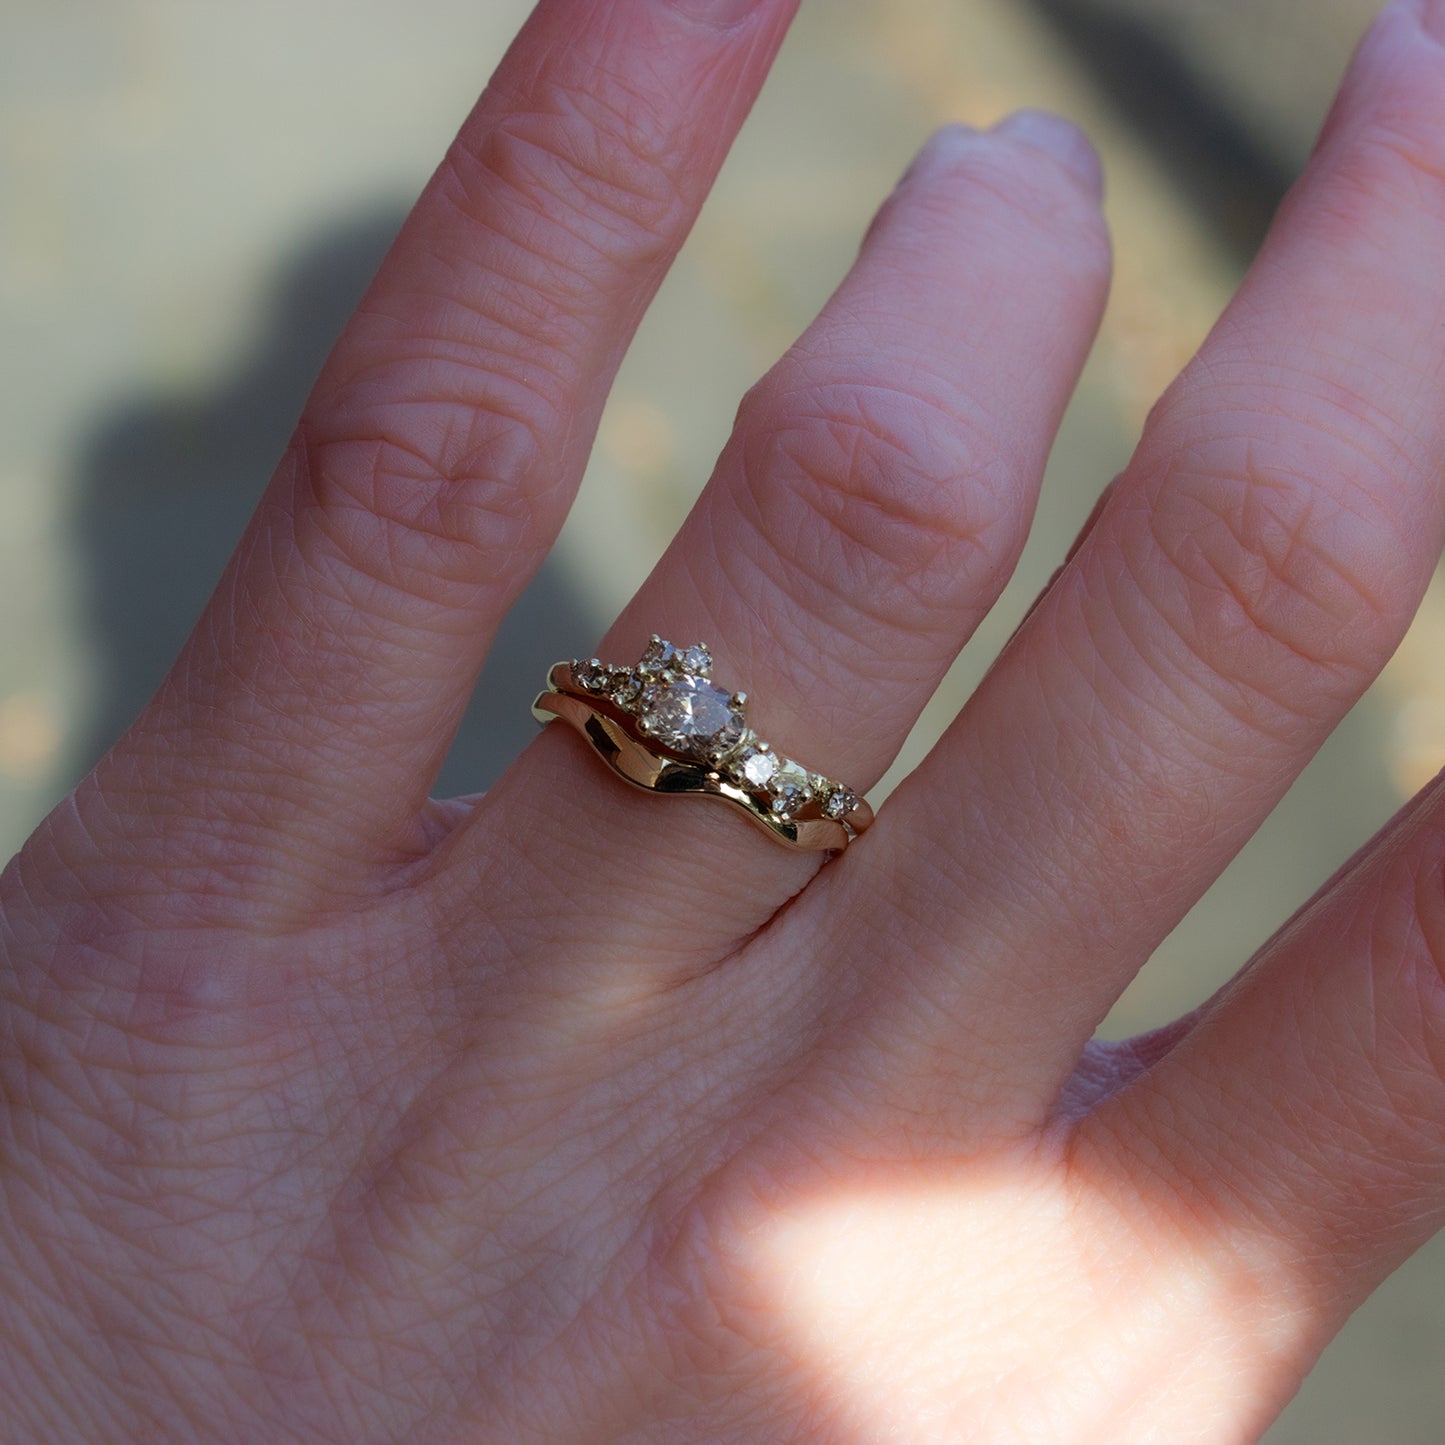 Organically shaped, flowy gold band. Paired with perfectly matching alternative engagement ring, glimmering with brown diamonds.